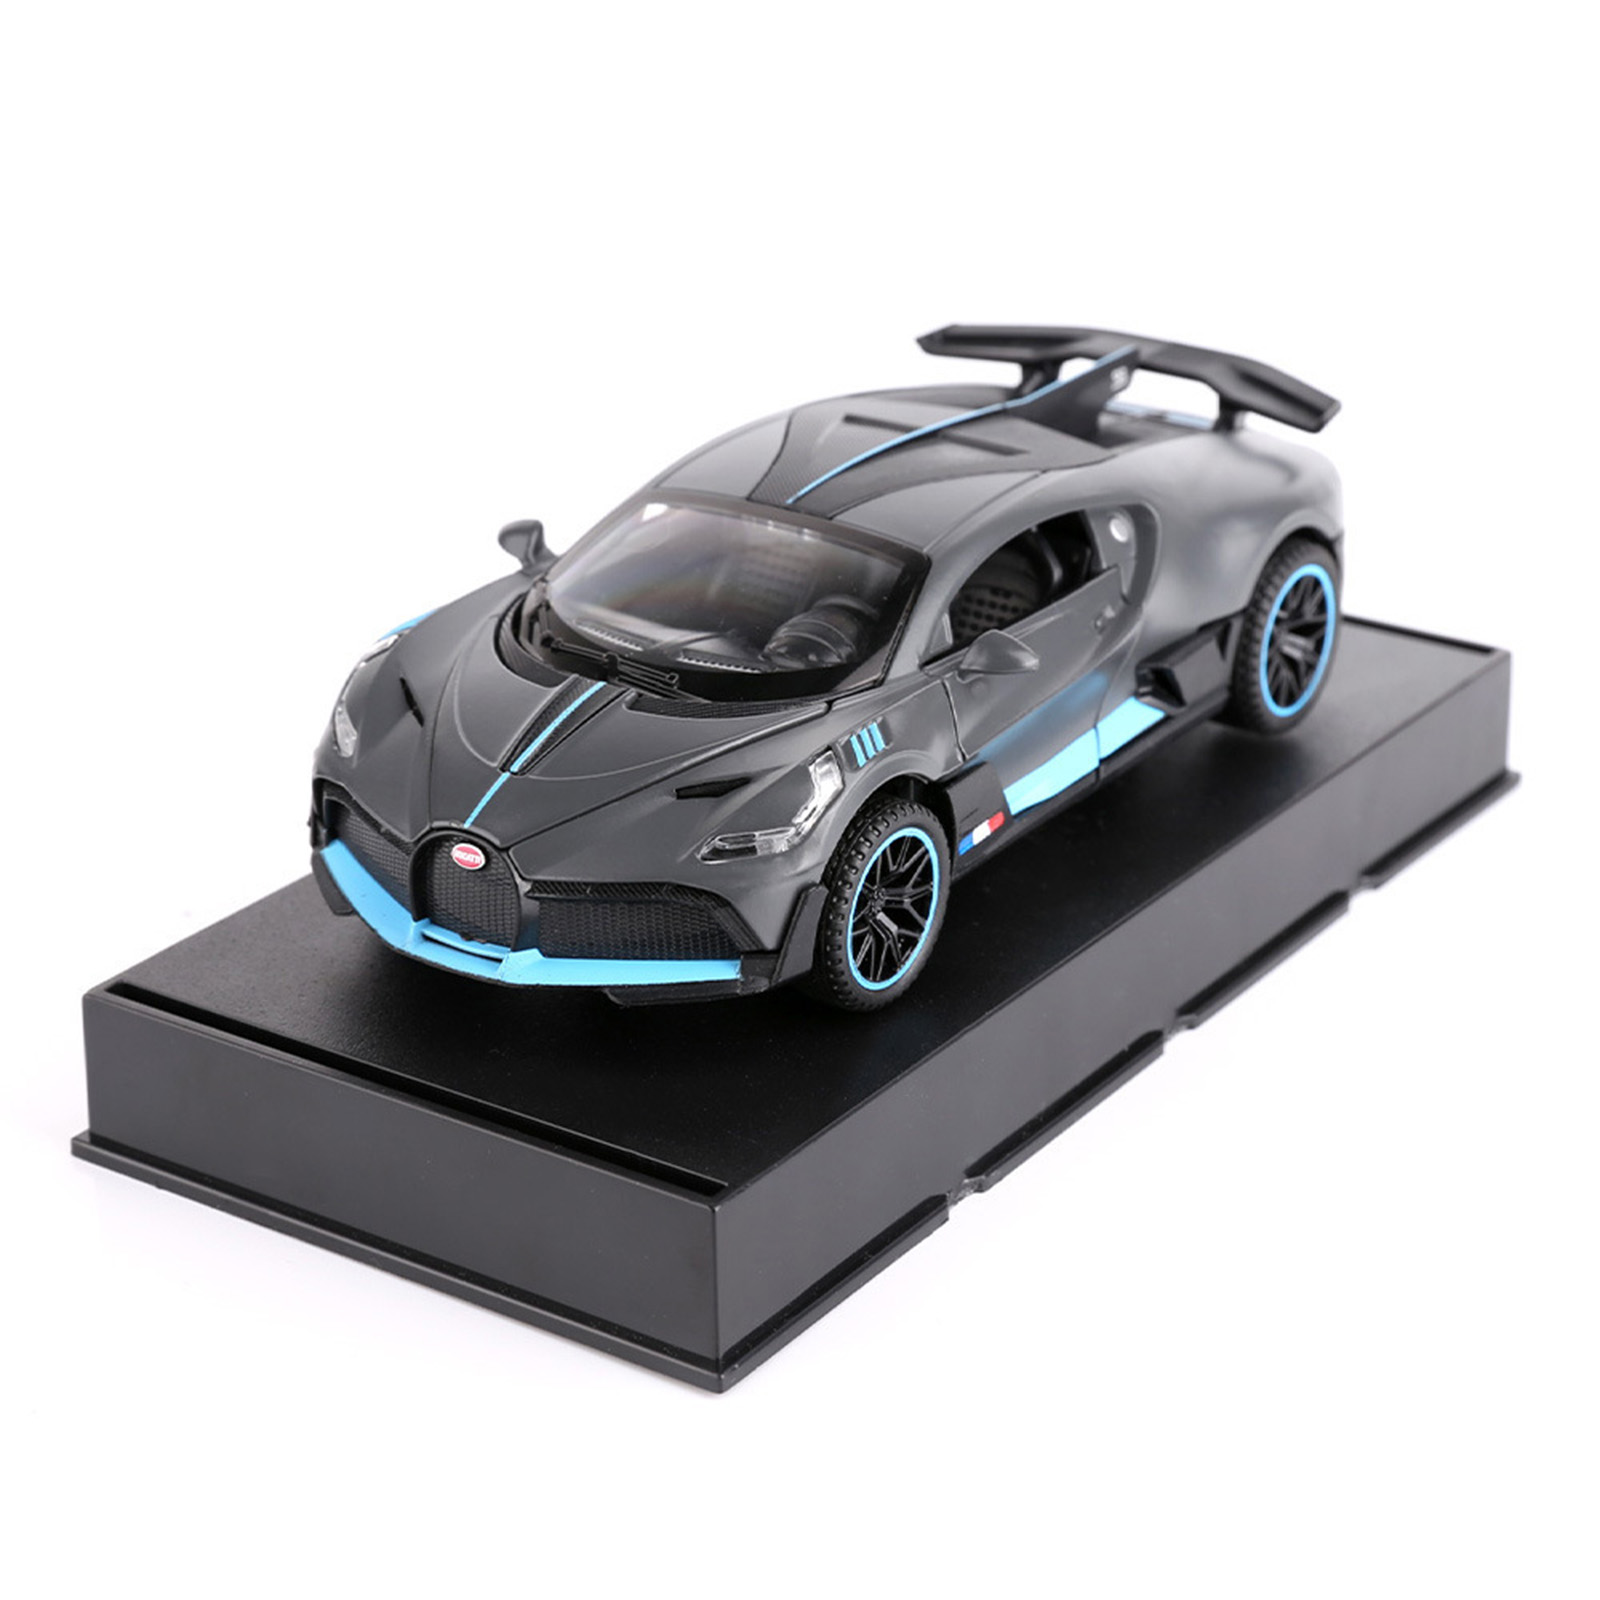 VB32603-1 Alloy Sports Car Model Ornaments Simulation Diecast Car With Sound Light For Kids Birthday Christmas Gifts